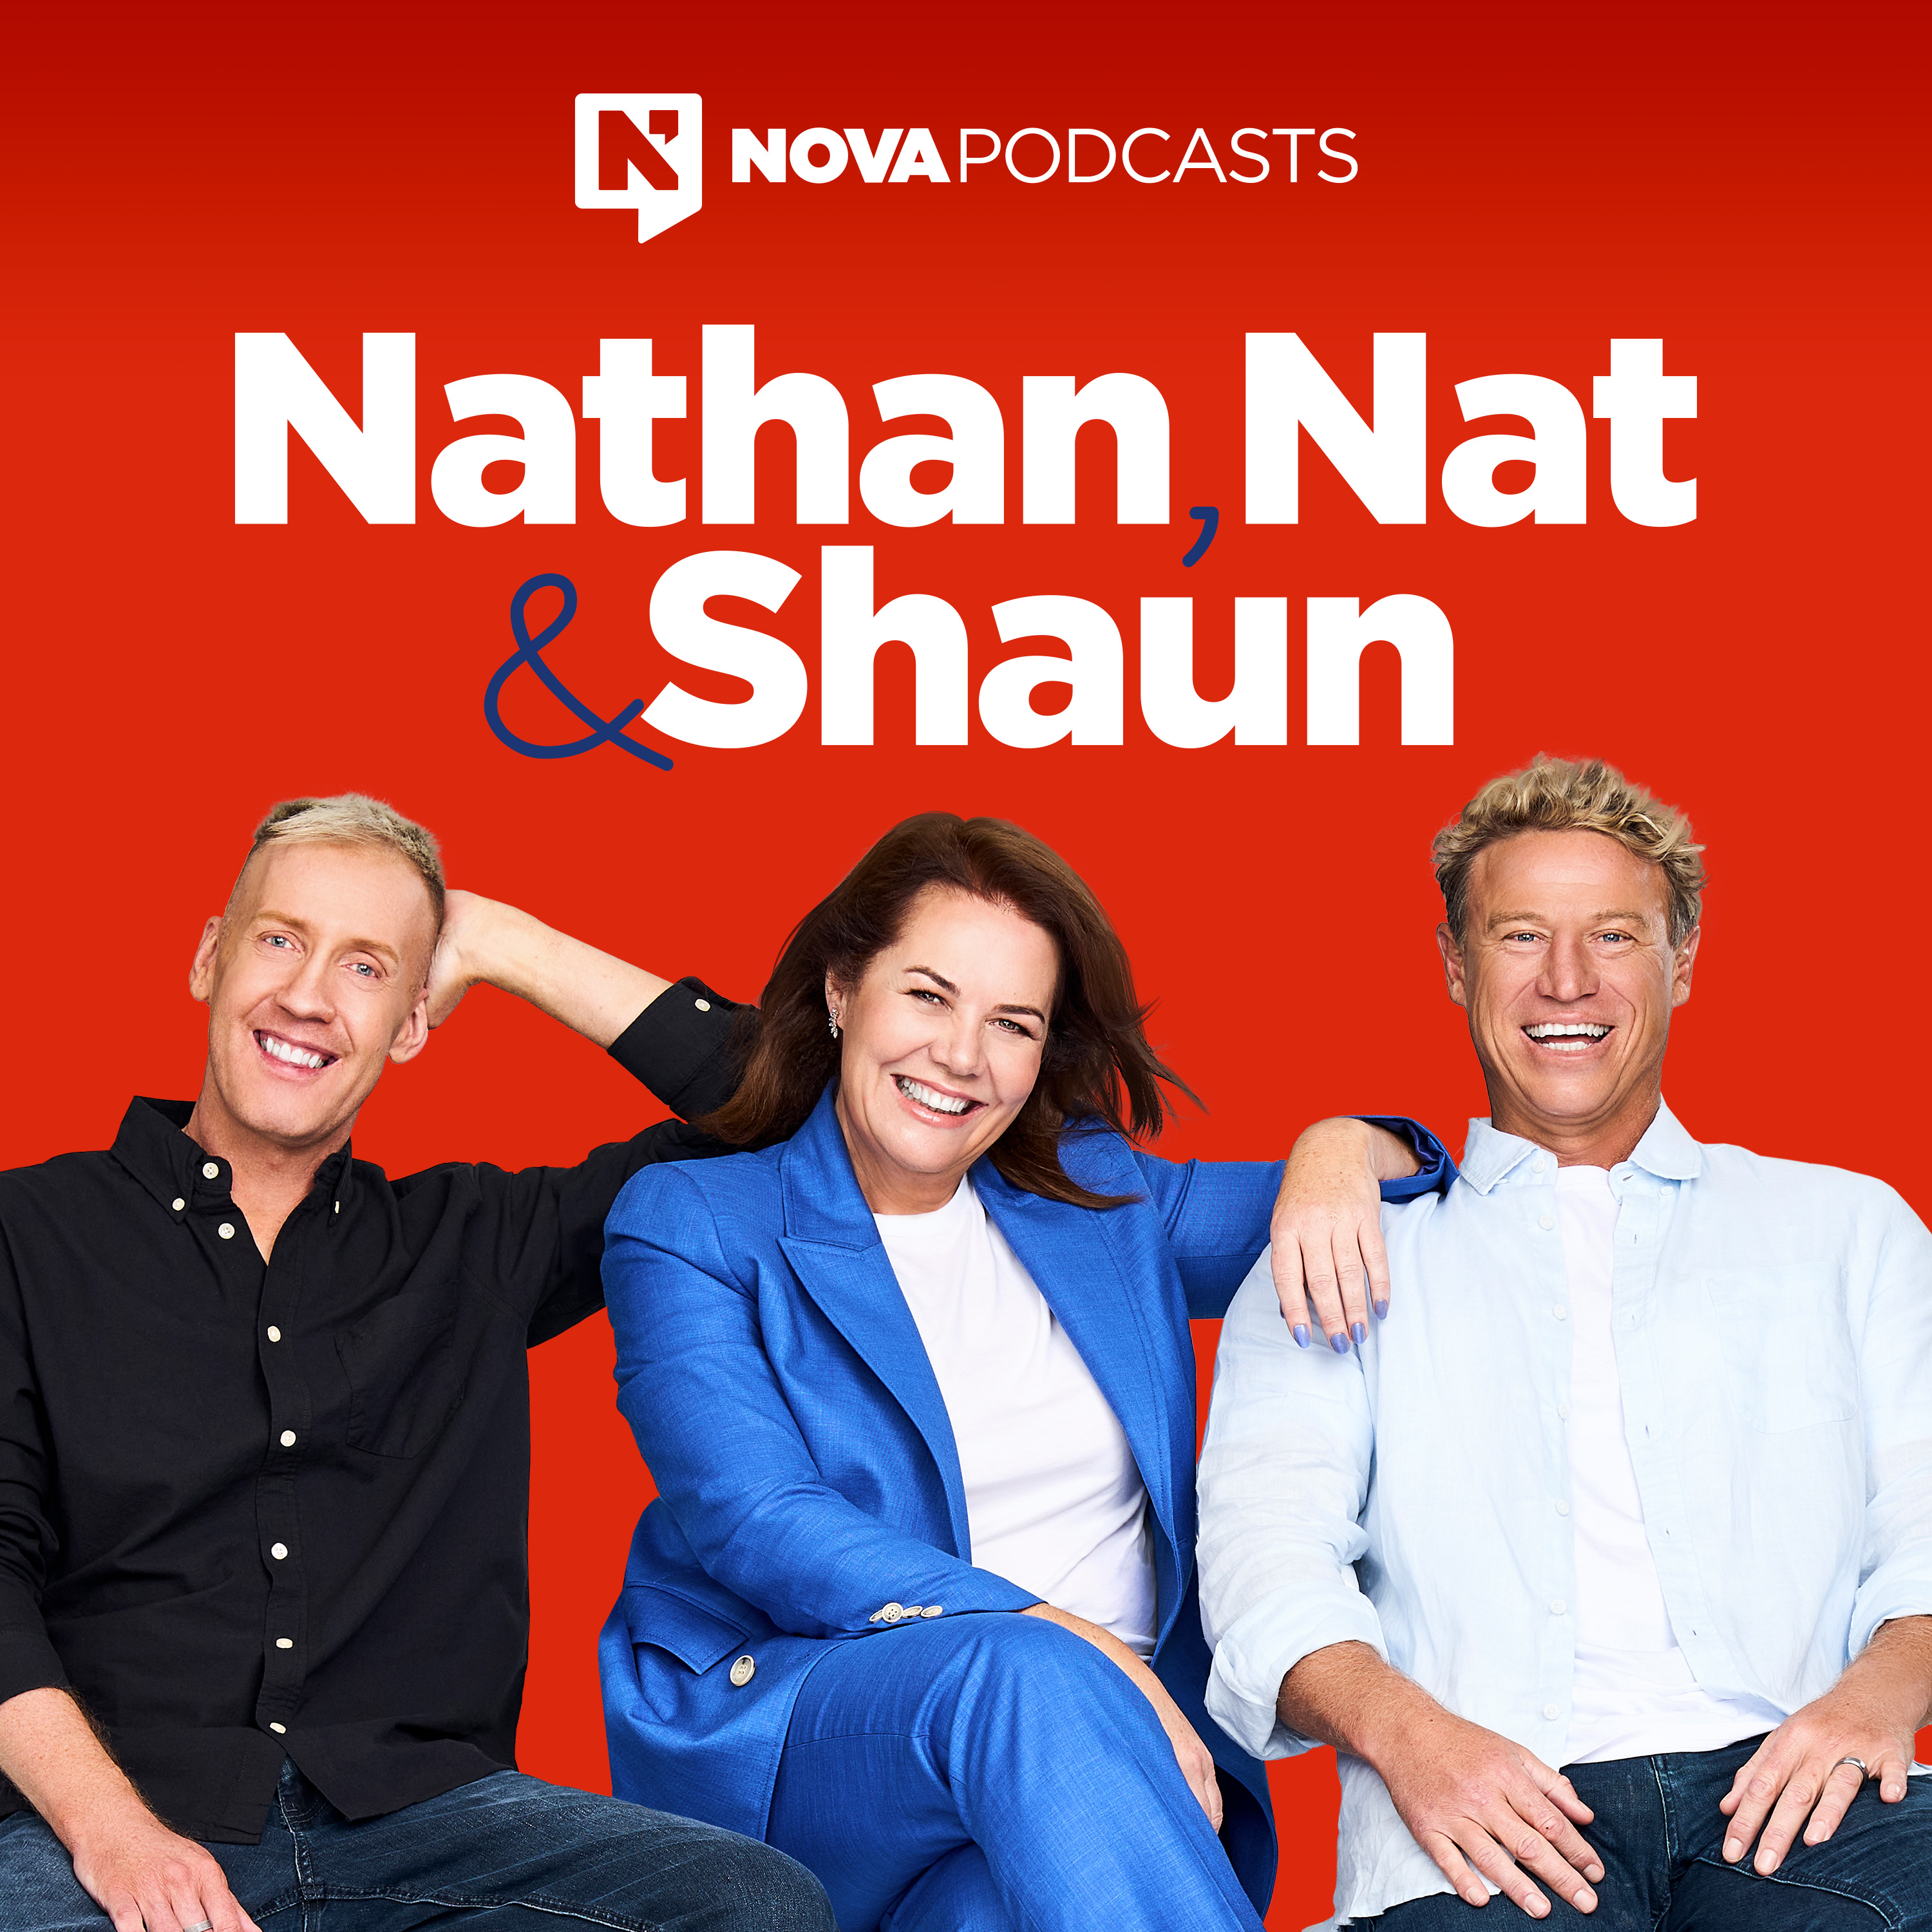 Best Of The Week | Our Stunt Nathans This Week Include C-Bass, Rove & The Prime Minister!